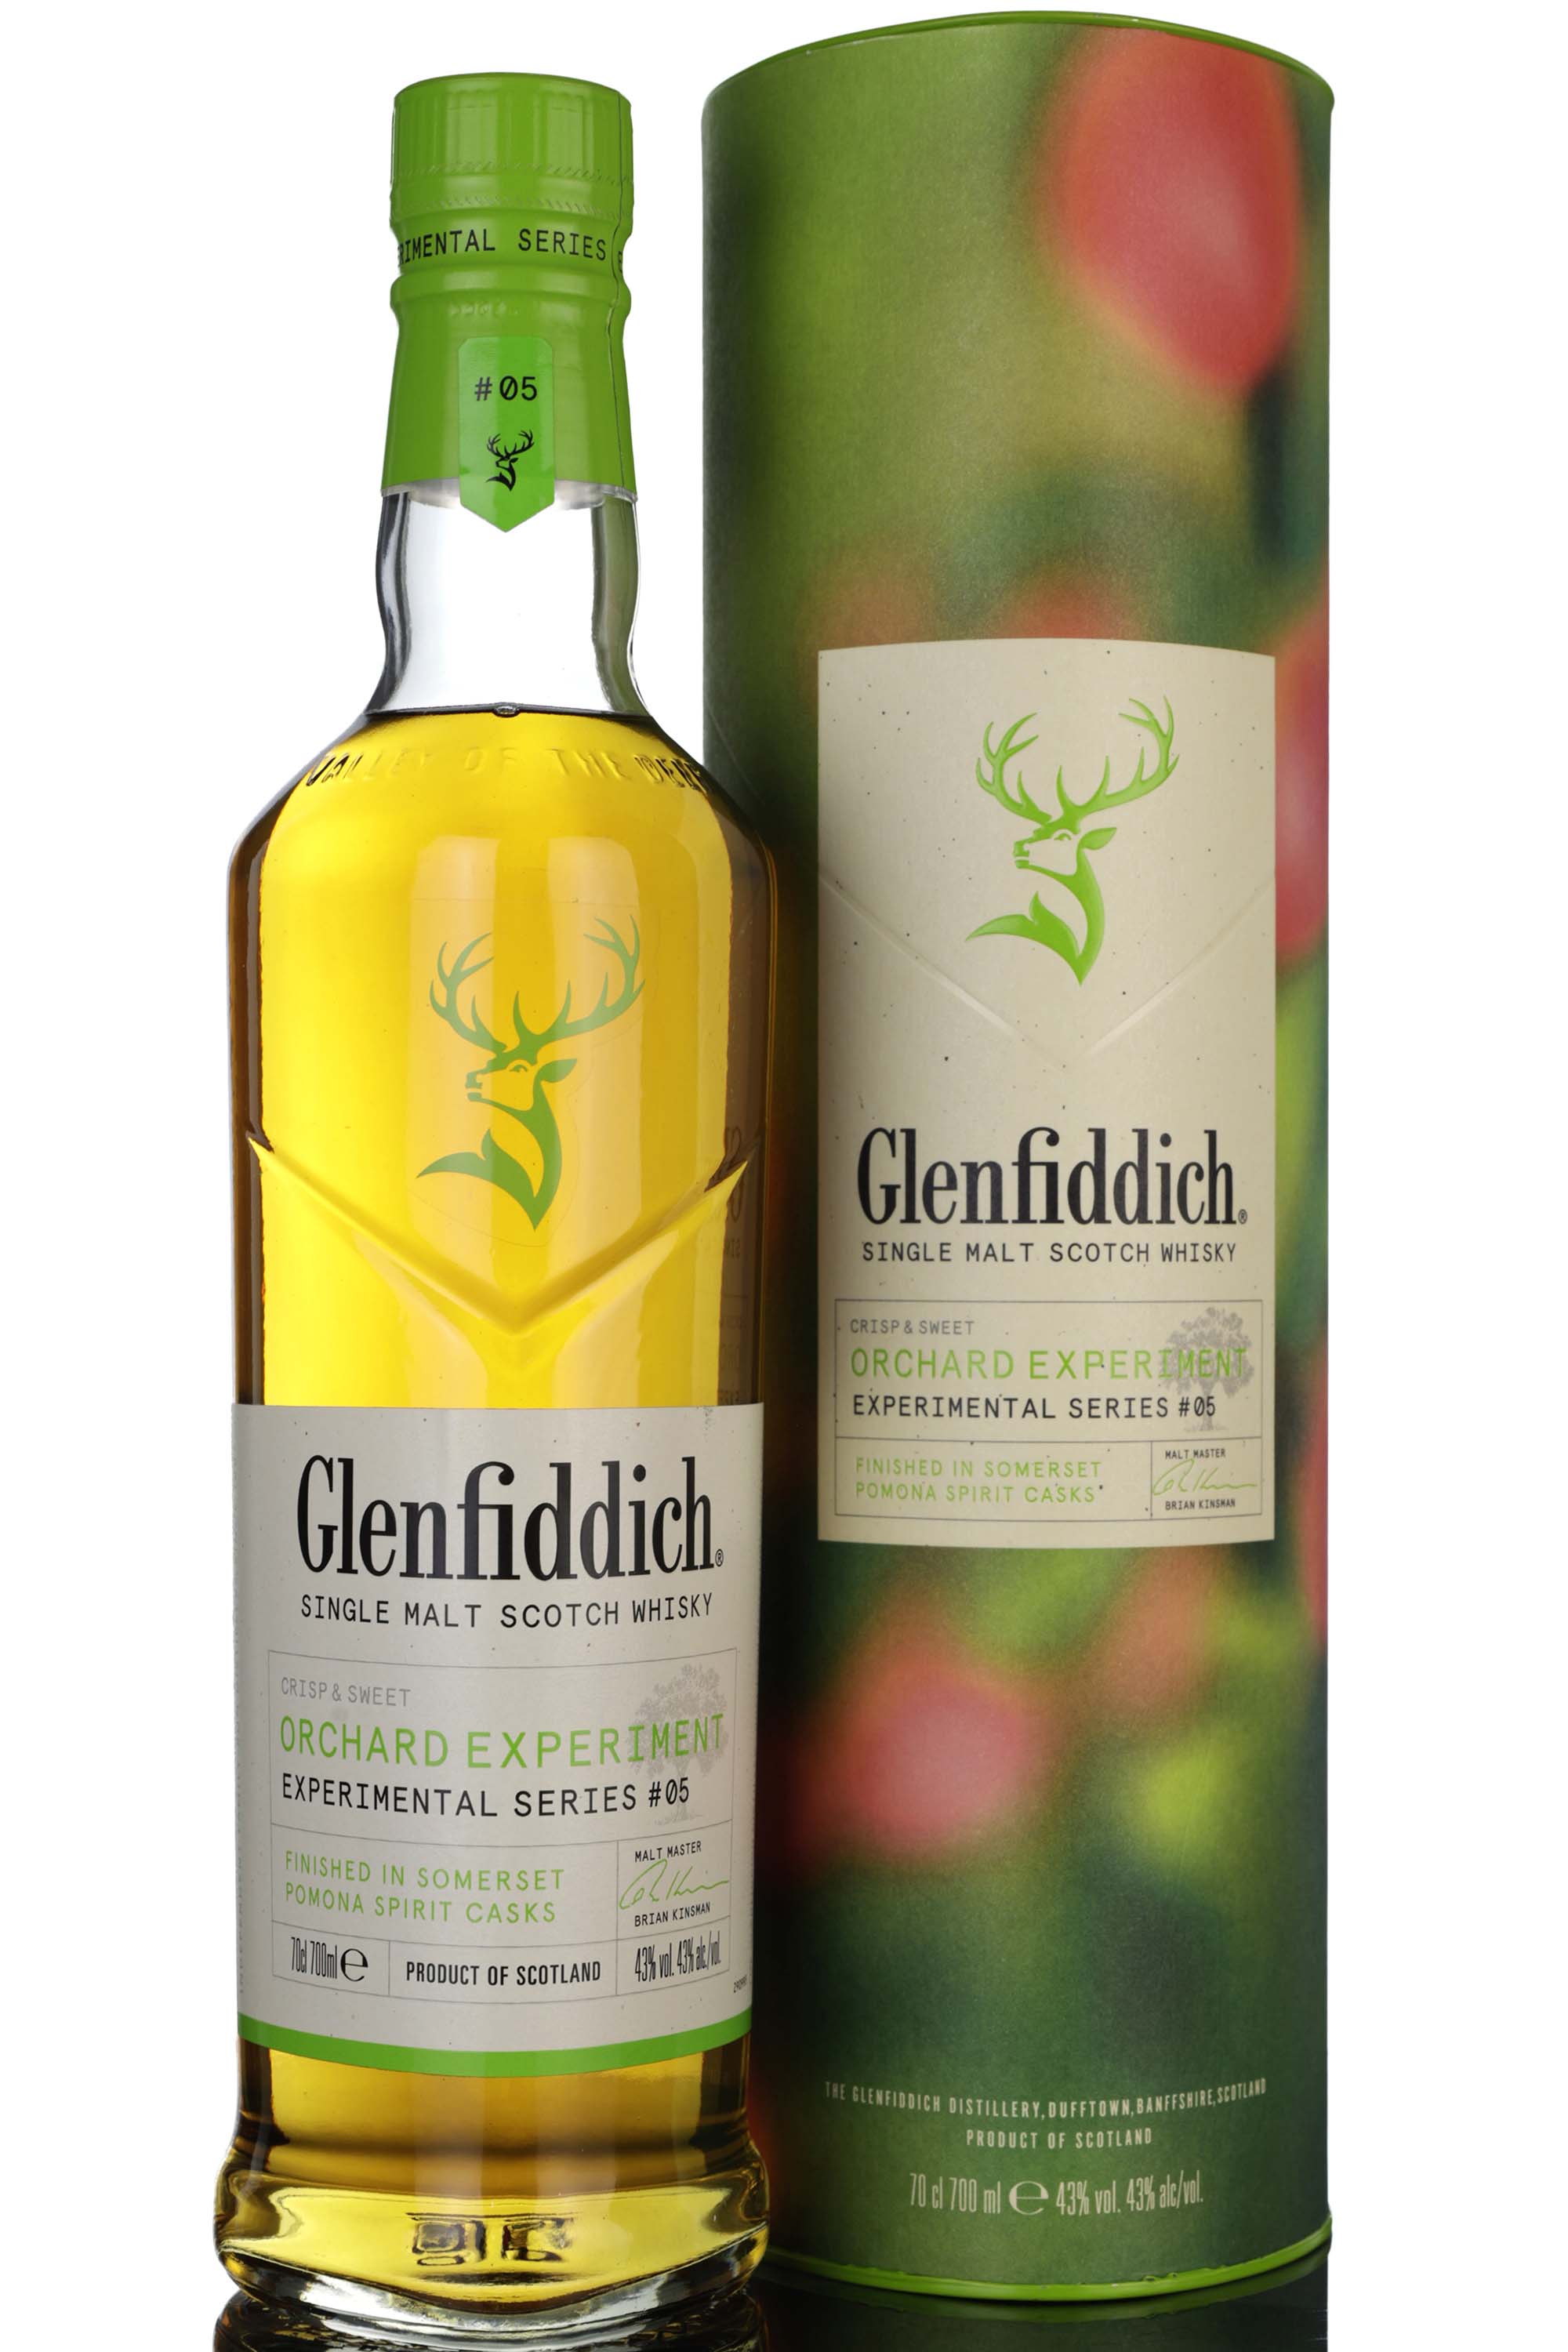 Glenfiddich Experimental Series 5 - Orchard